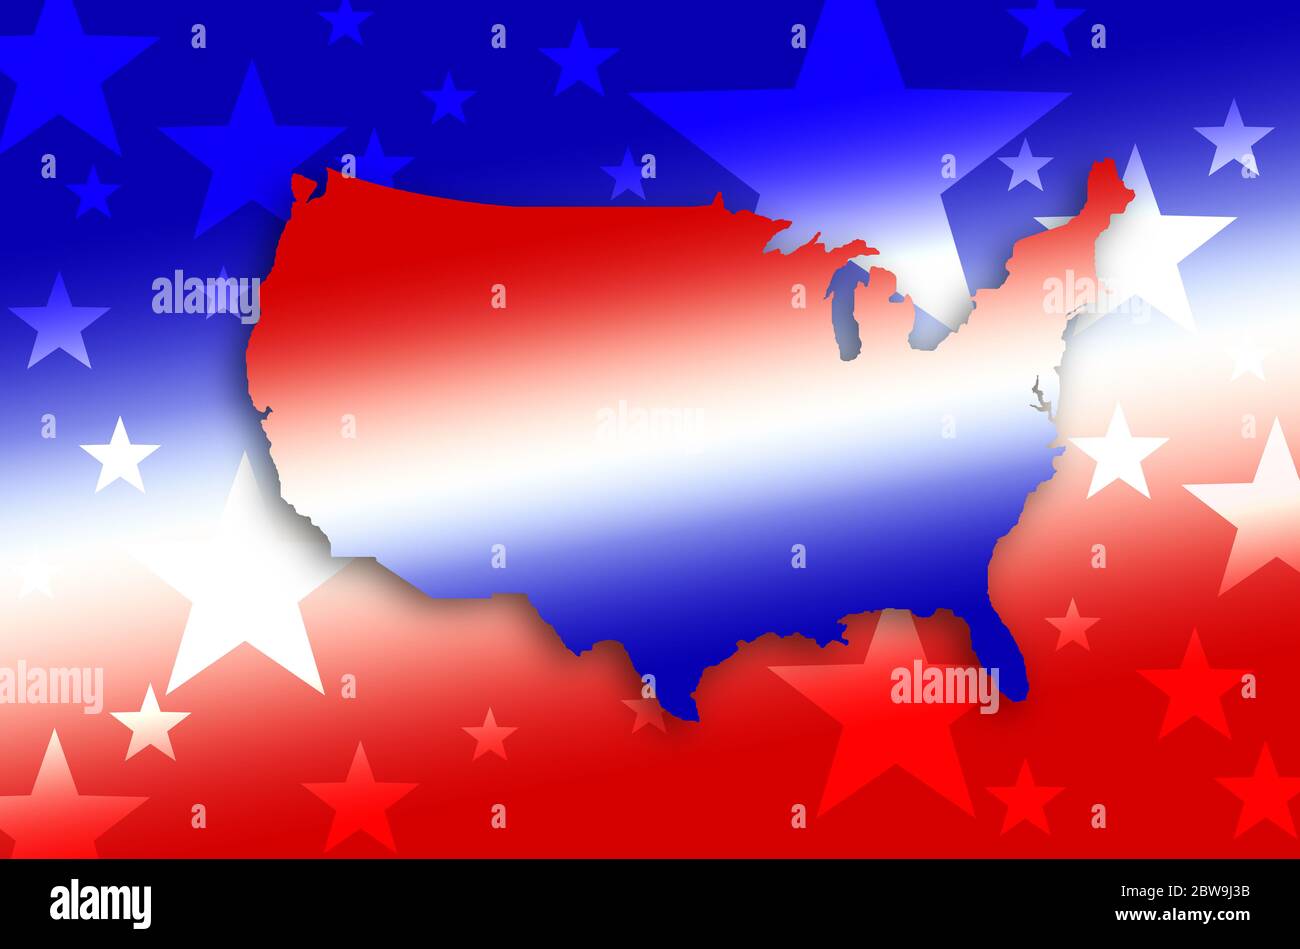 Digitally generated image of shape of USA map and stars Stock Photo